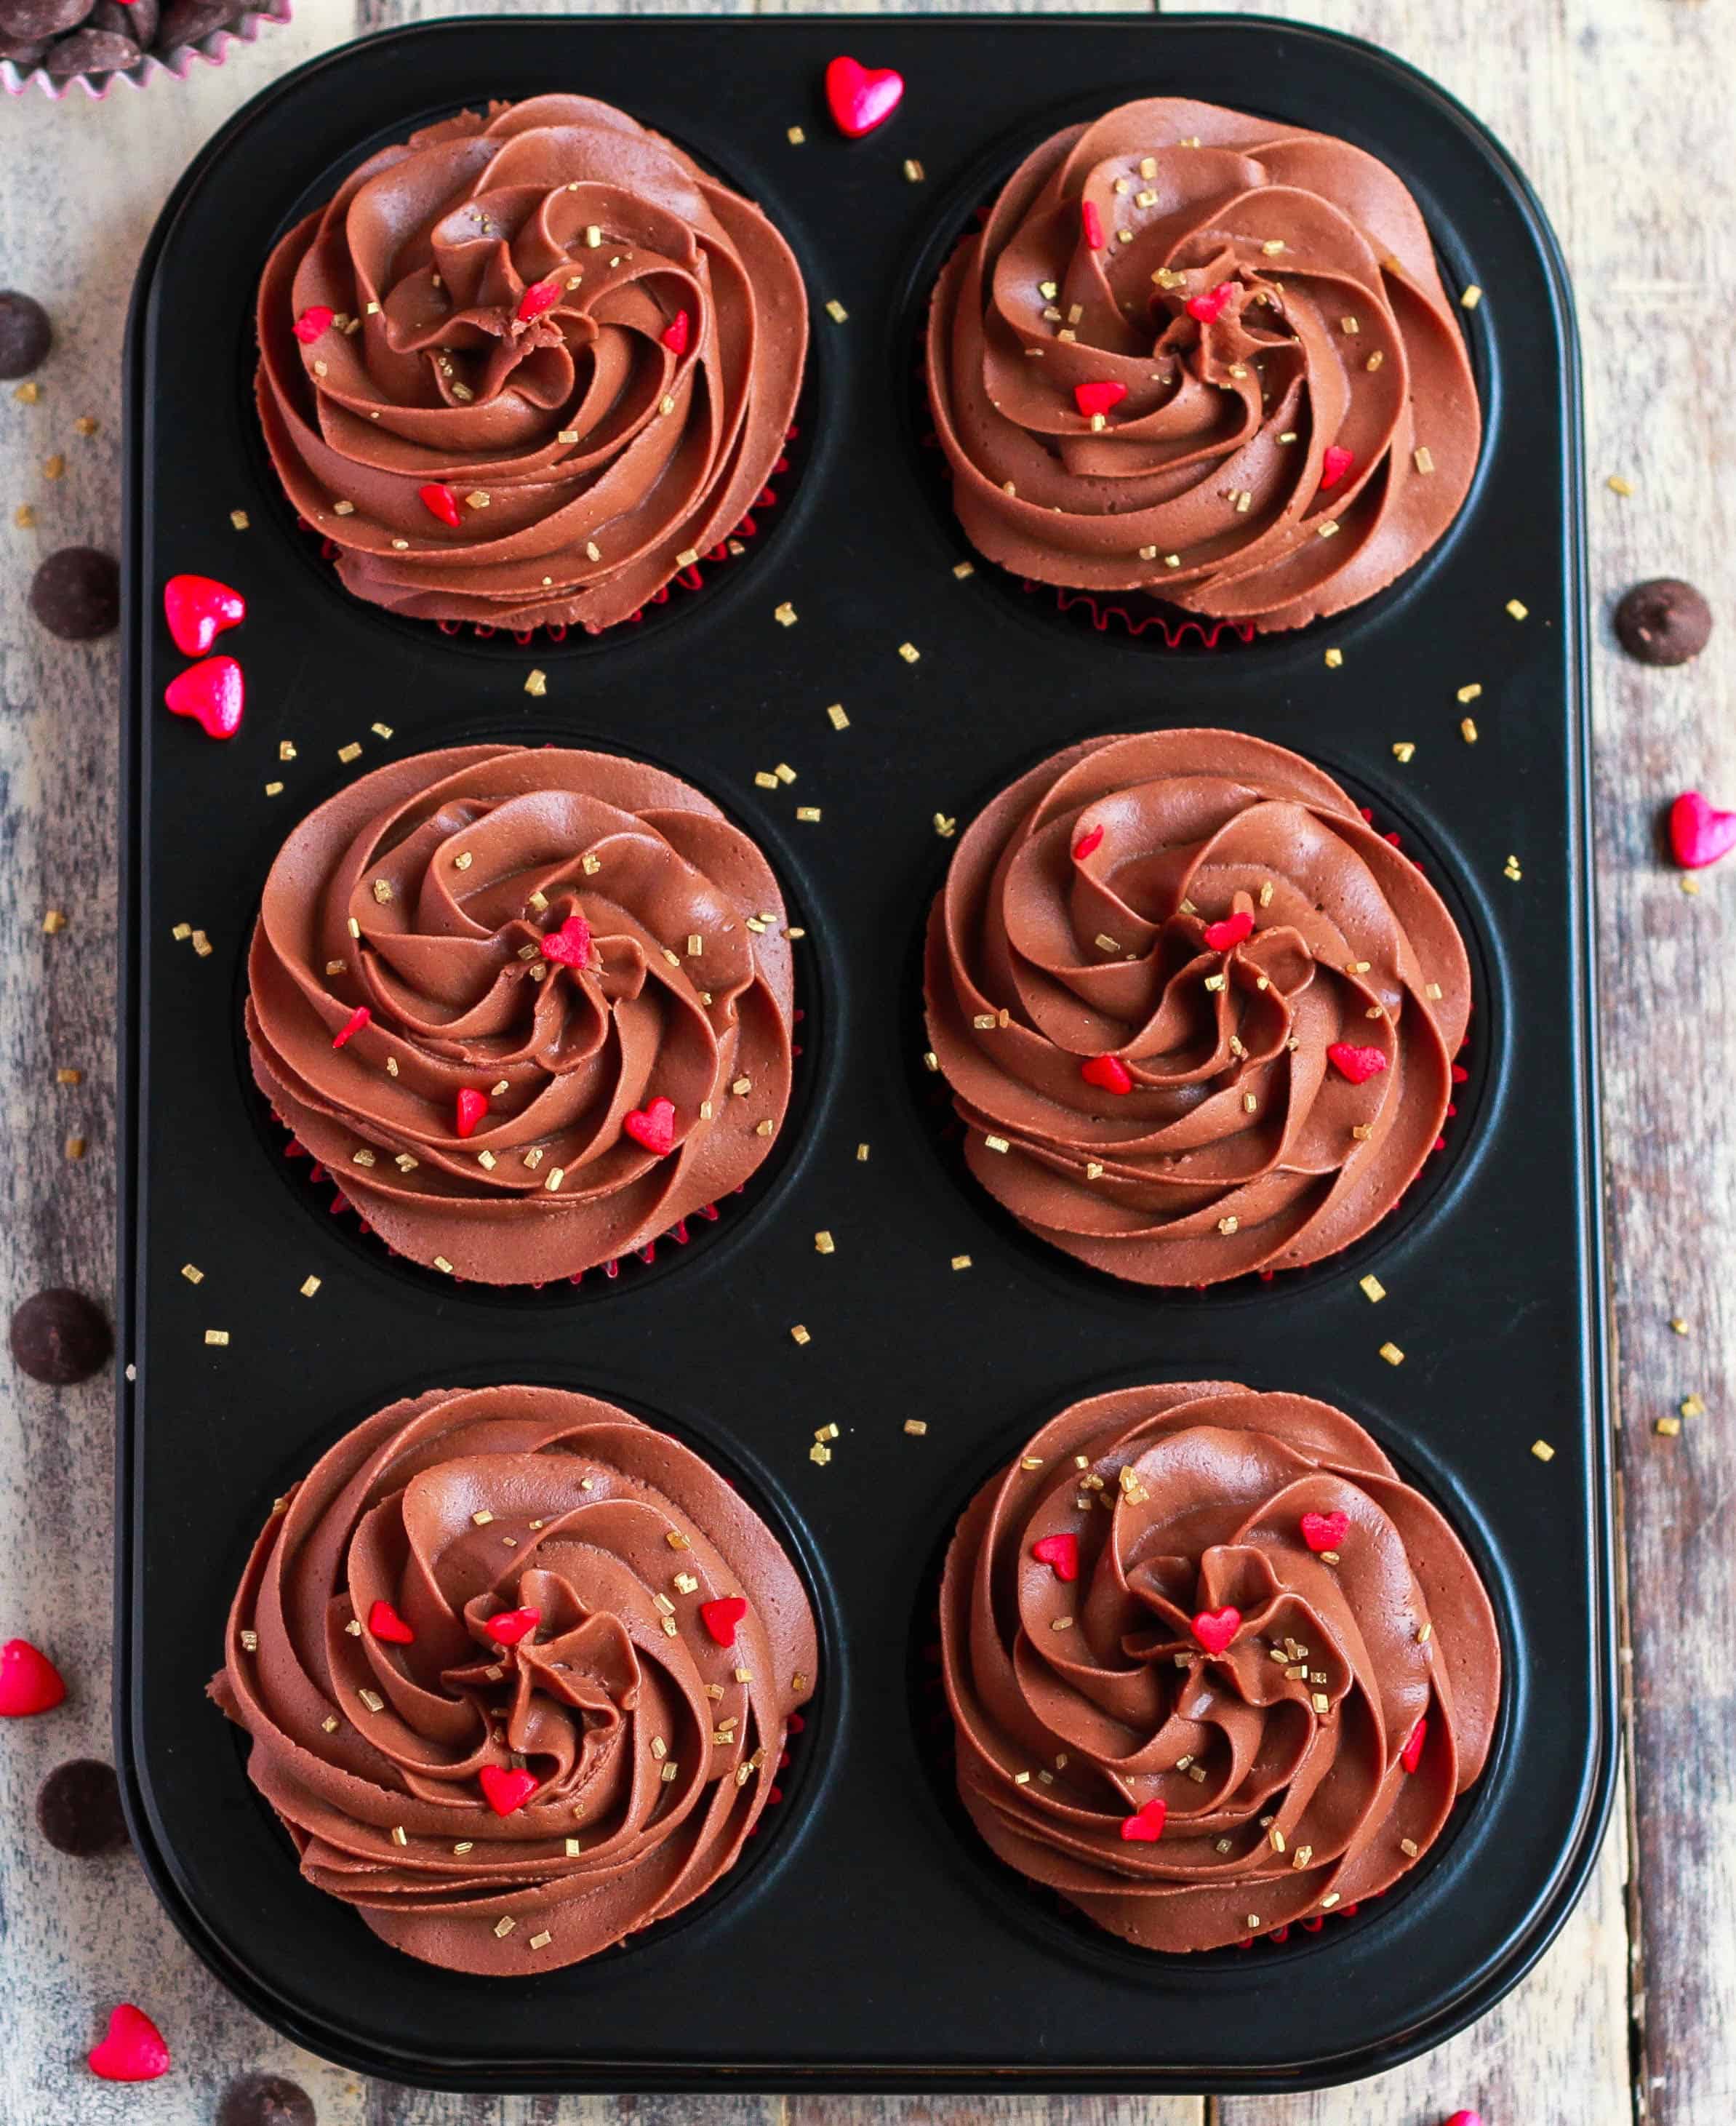 Mocha Cupcakes with Chocolate Cream Cheese Frosting infused with Baileys Glutenfree